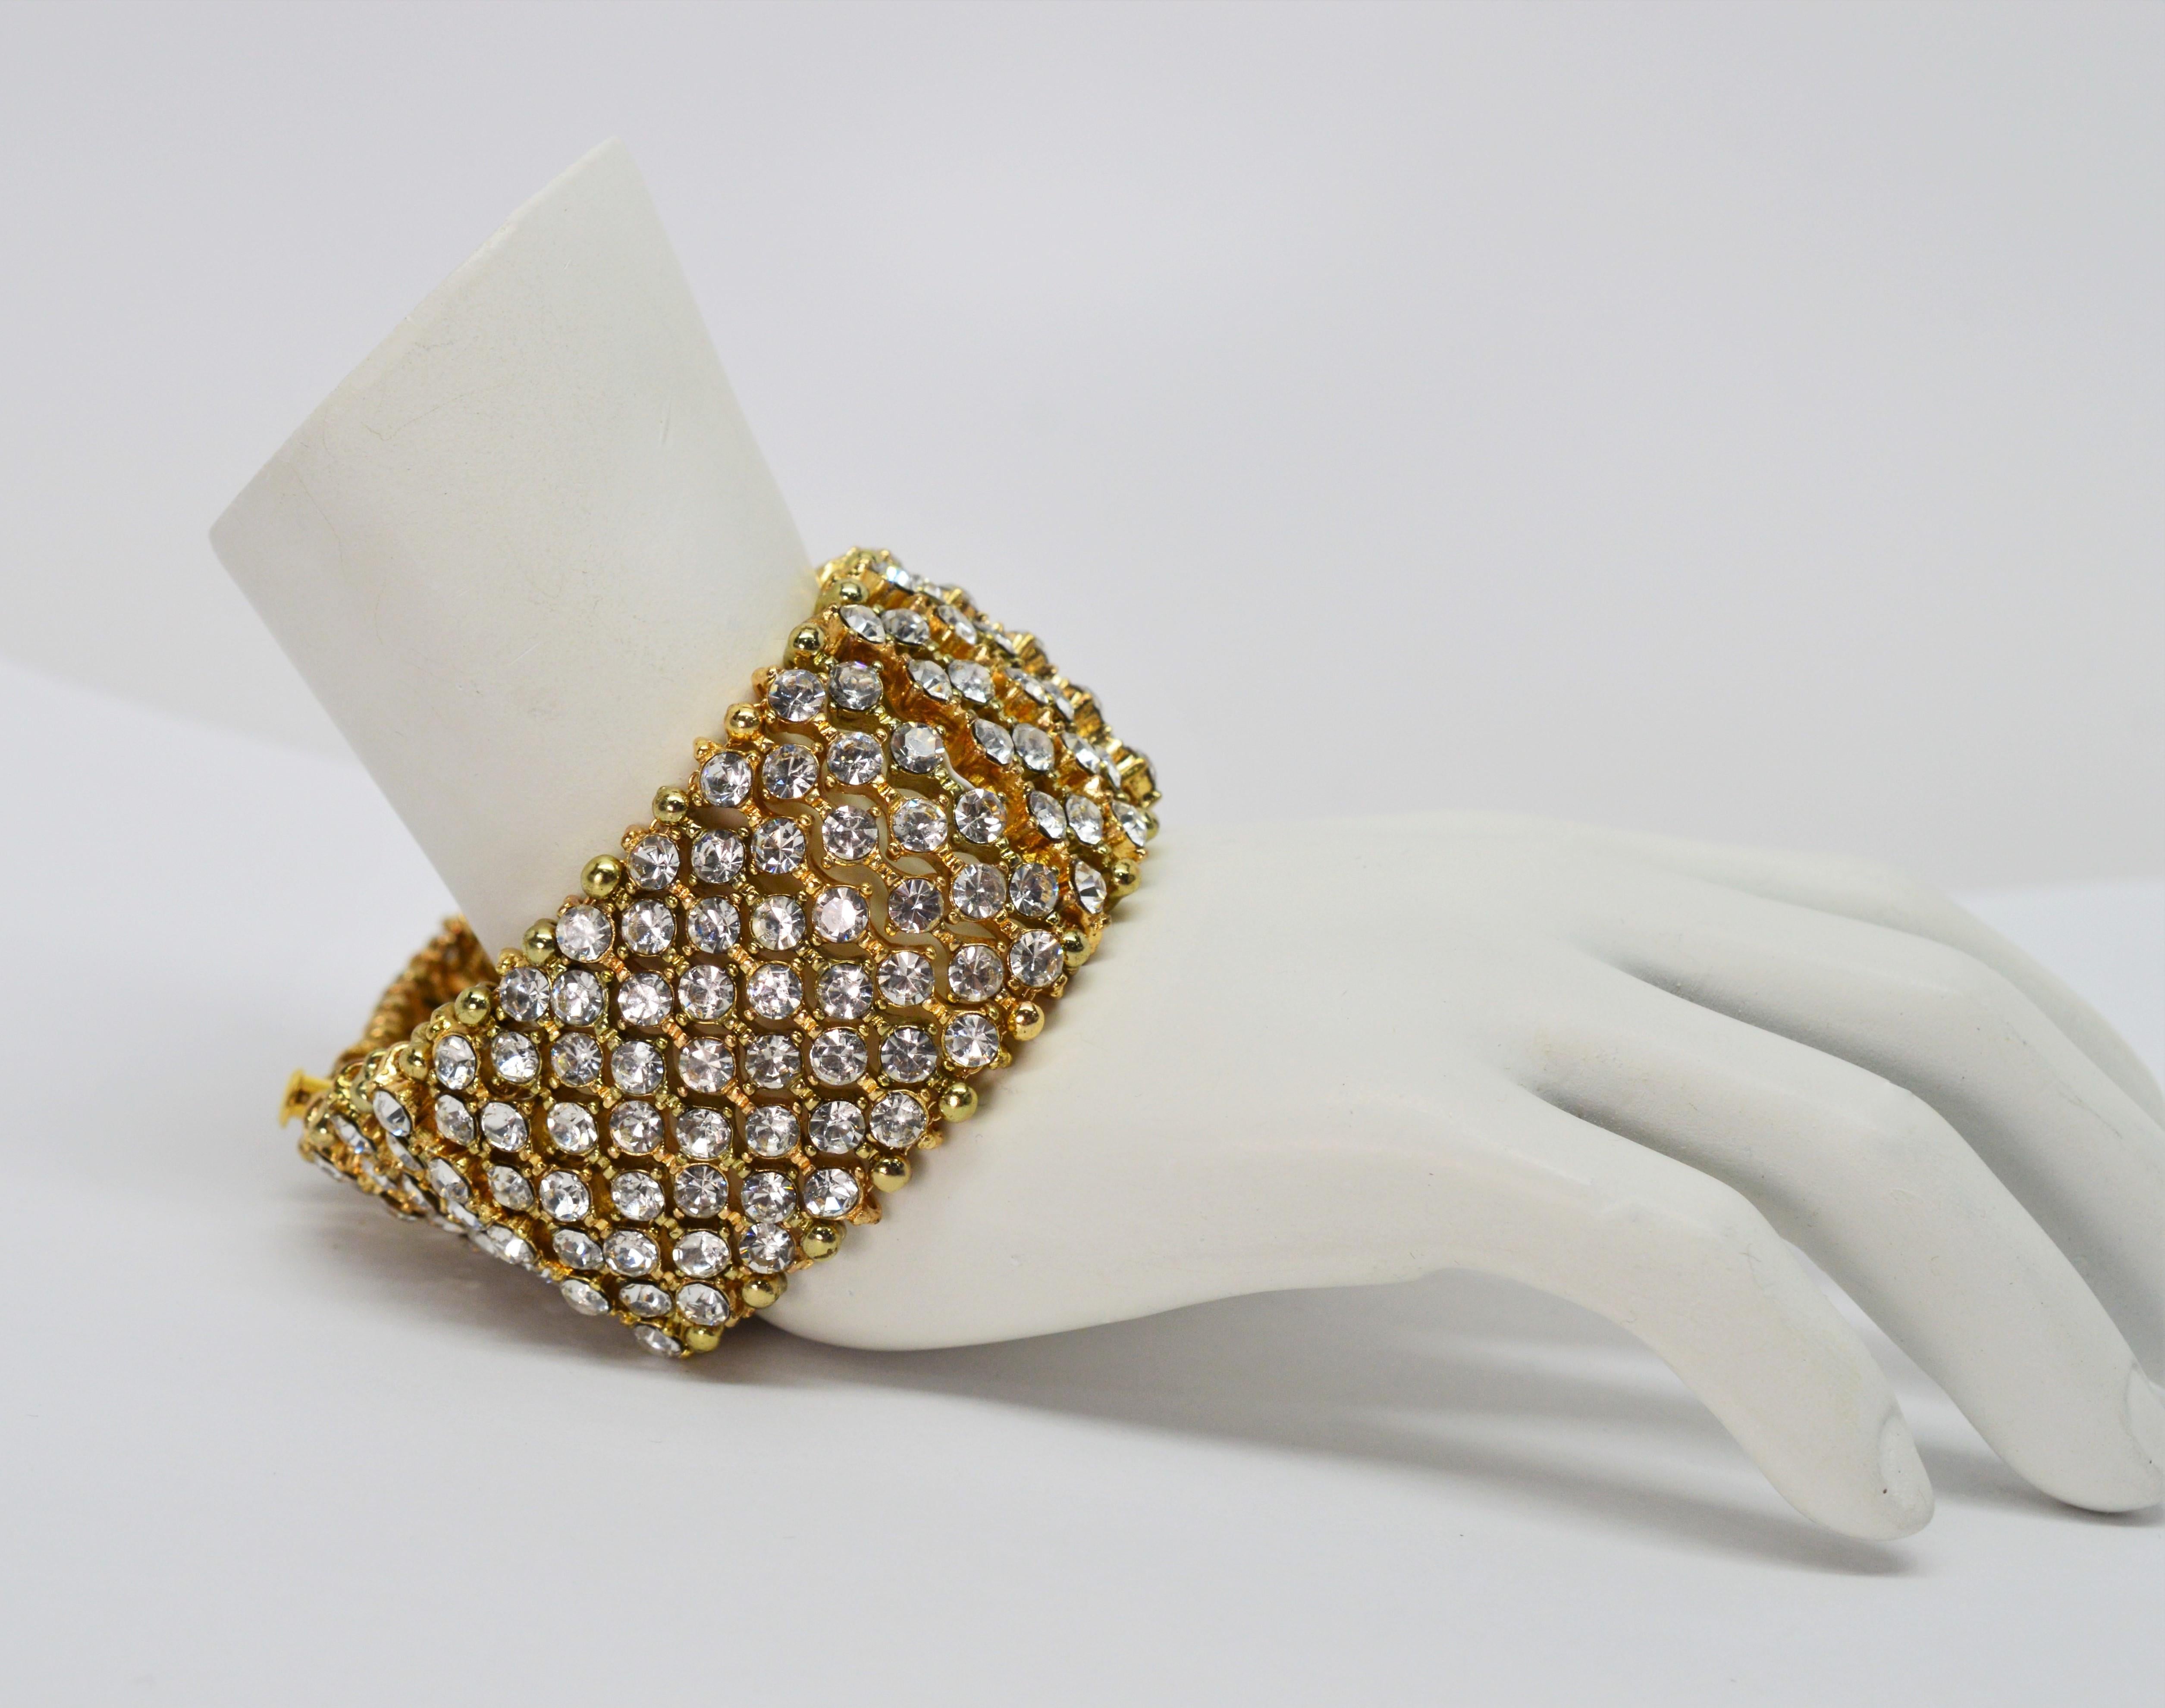 Brilliant rhinestone crystals cause a sensation when wearing this unusual costume jeweled bracelet. Restored and strung on gold plated chain to create this bracelet are striking 1-1/4 inch wide dazzling crystal laden links set in a gold-toned base